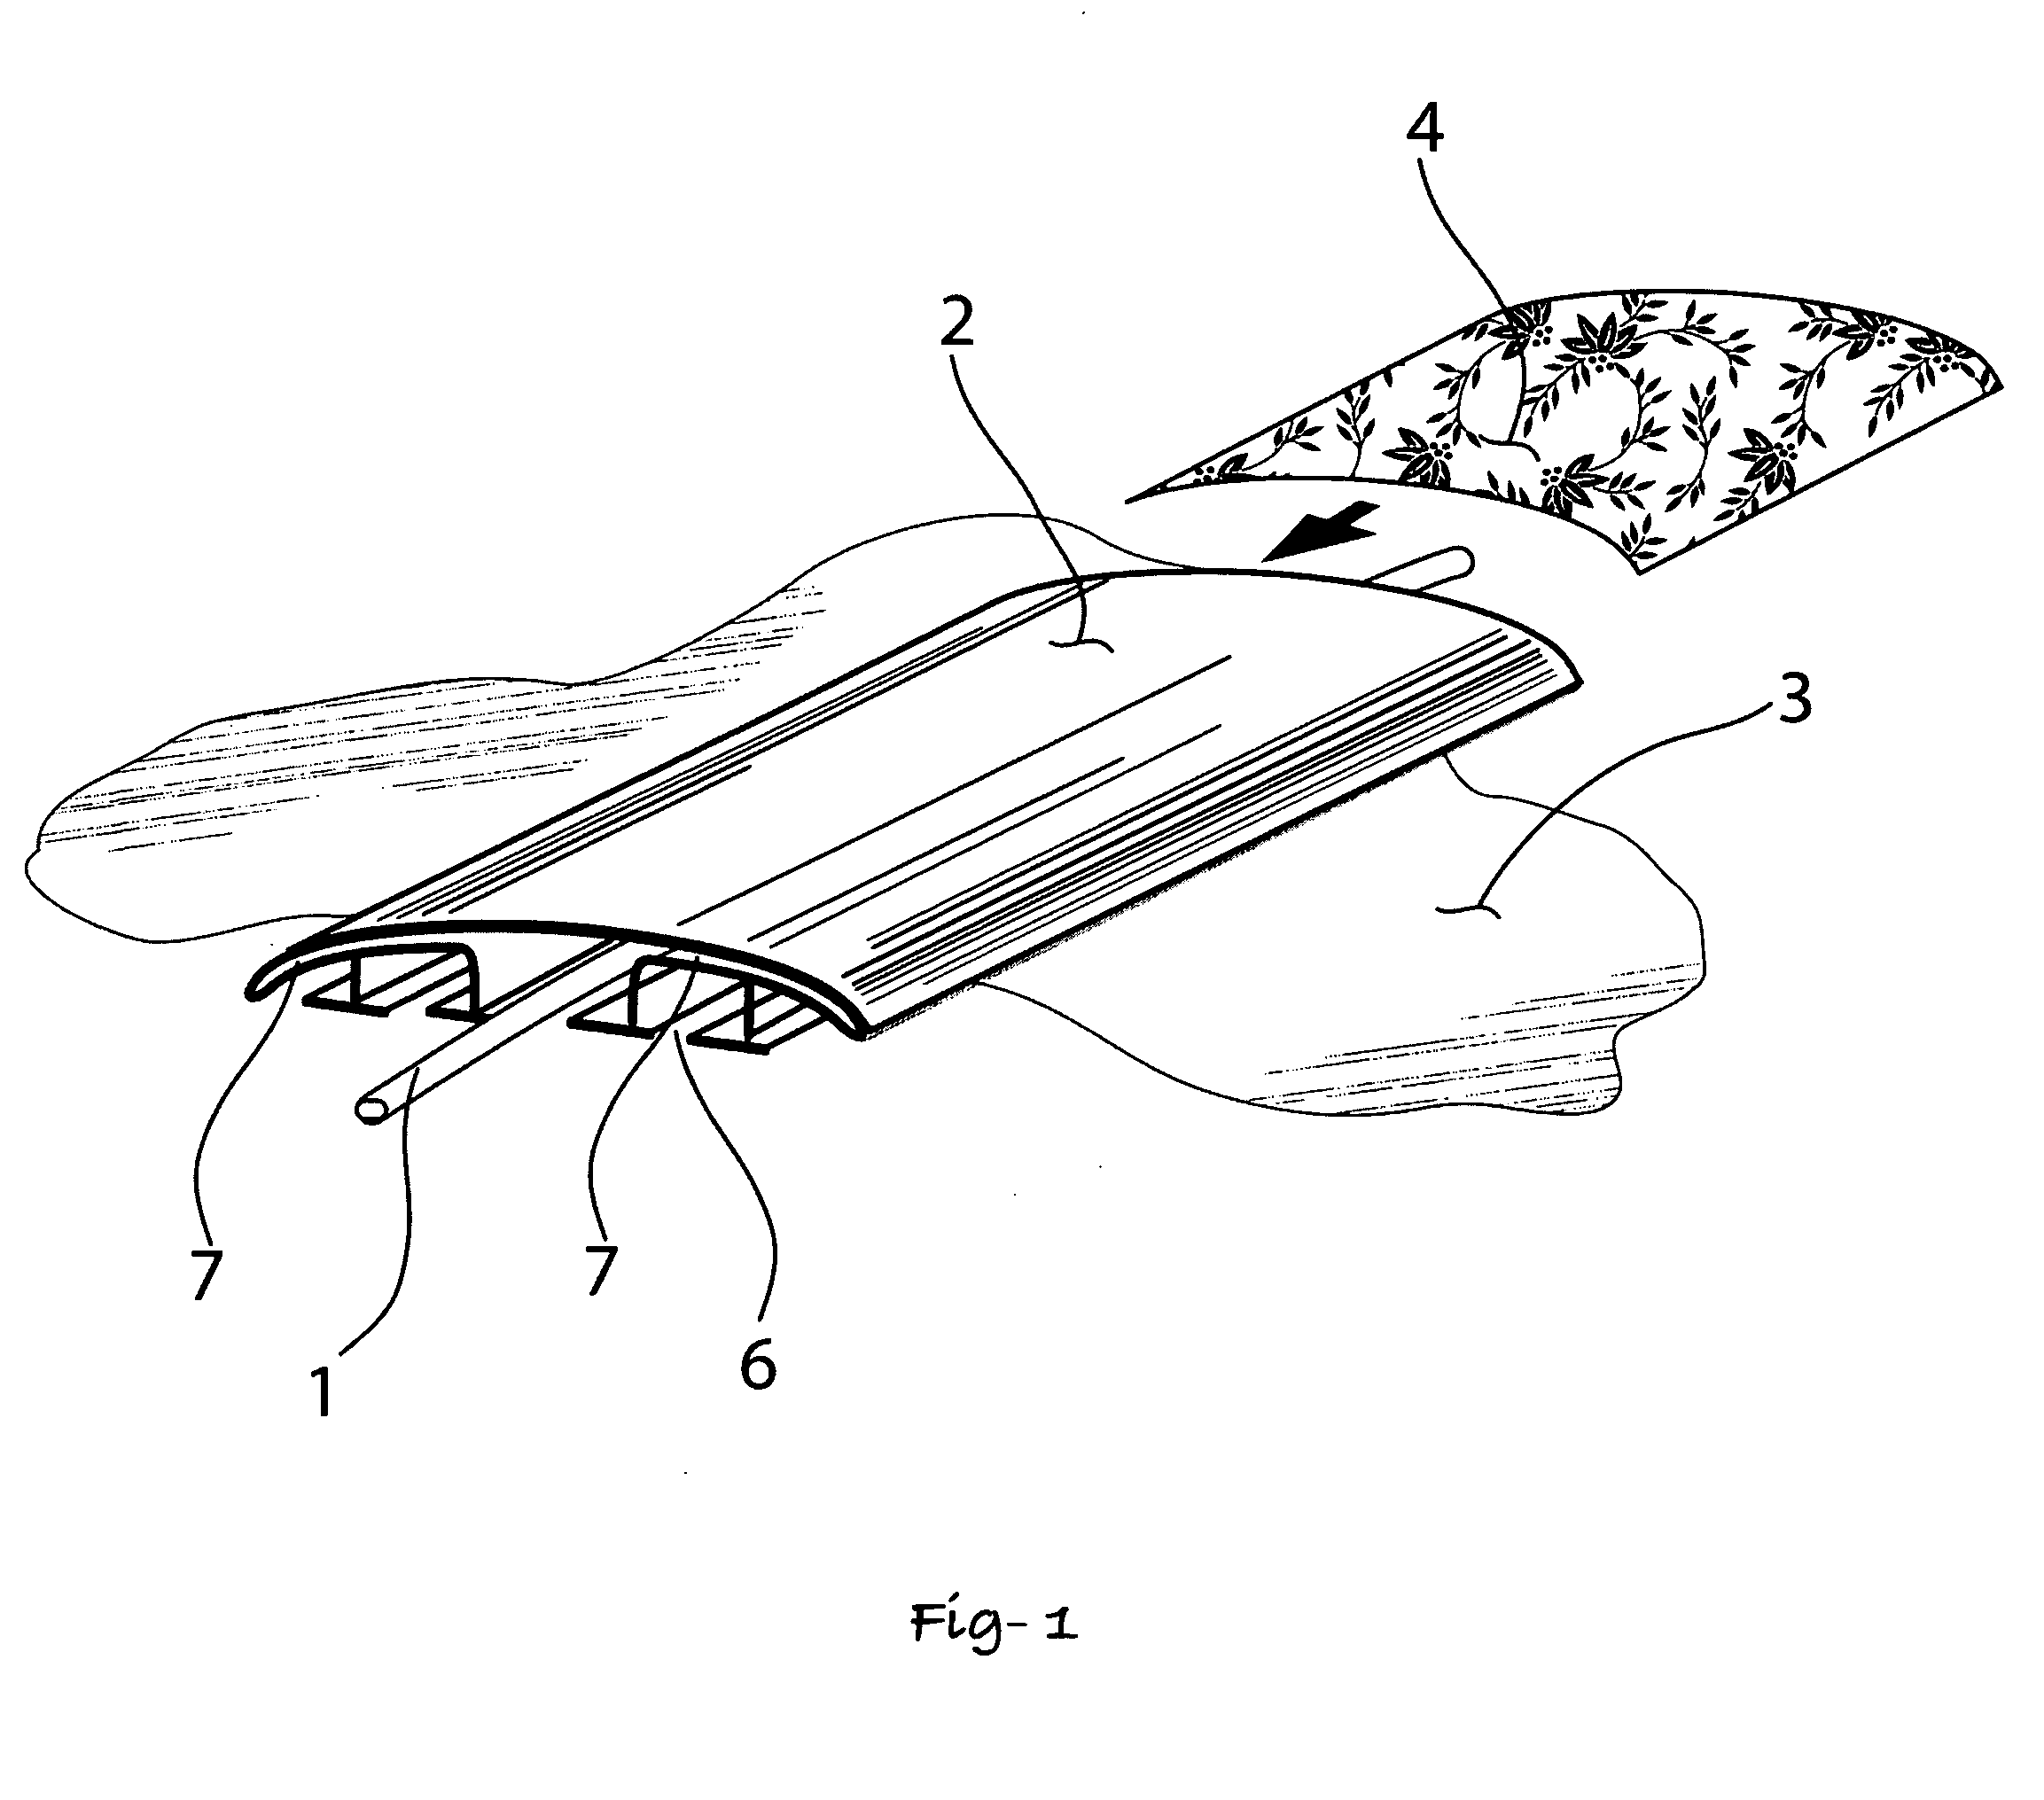 Integrated graphical containment structure